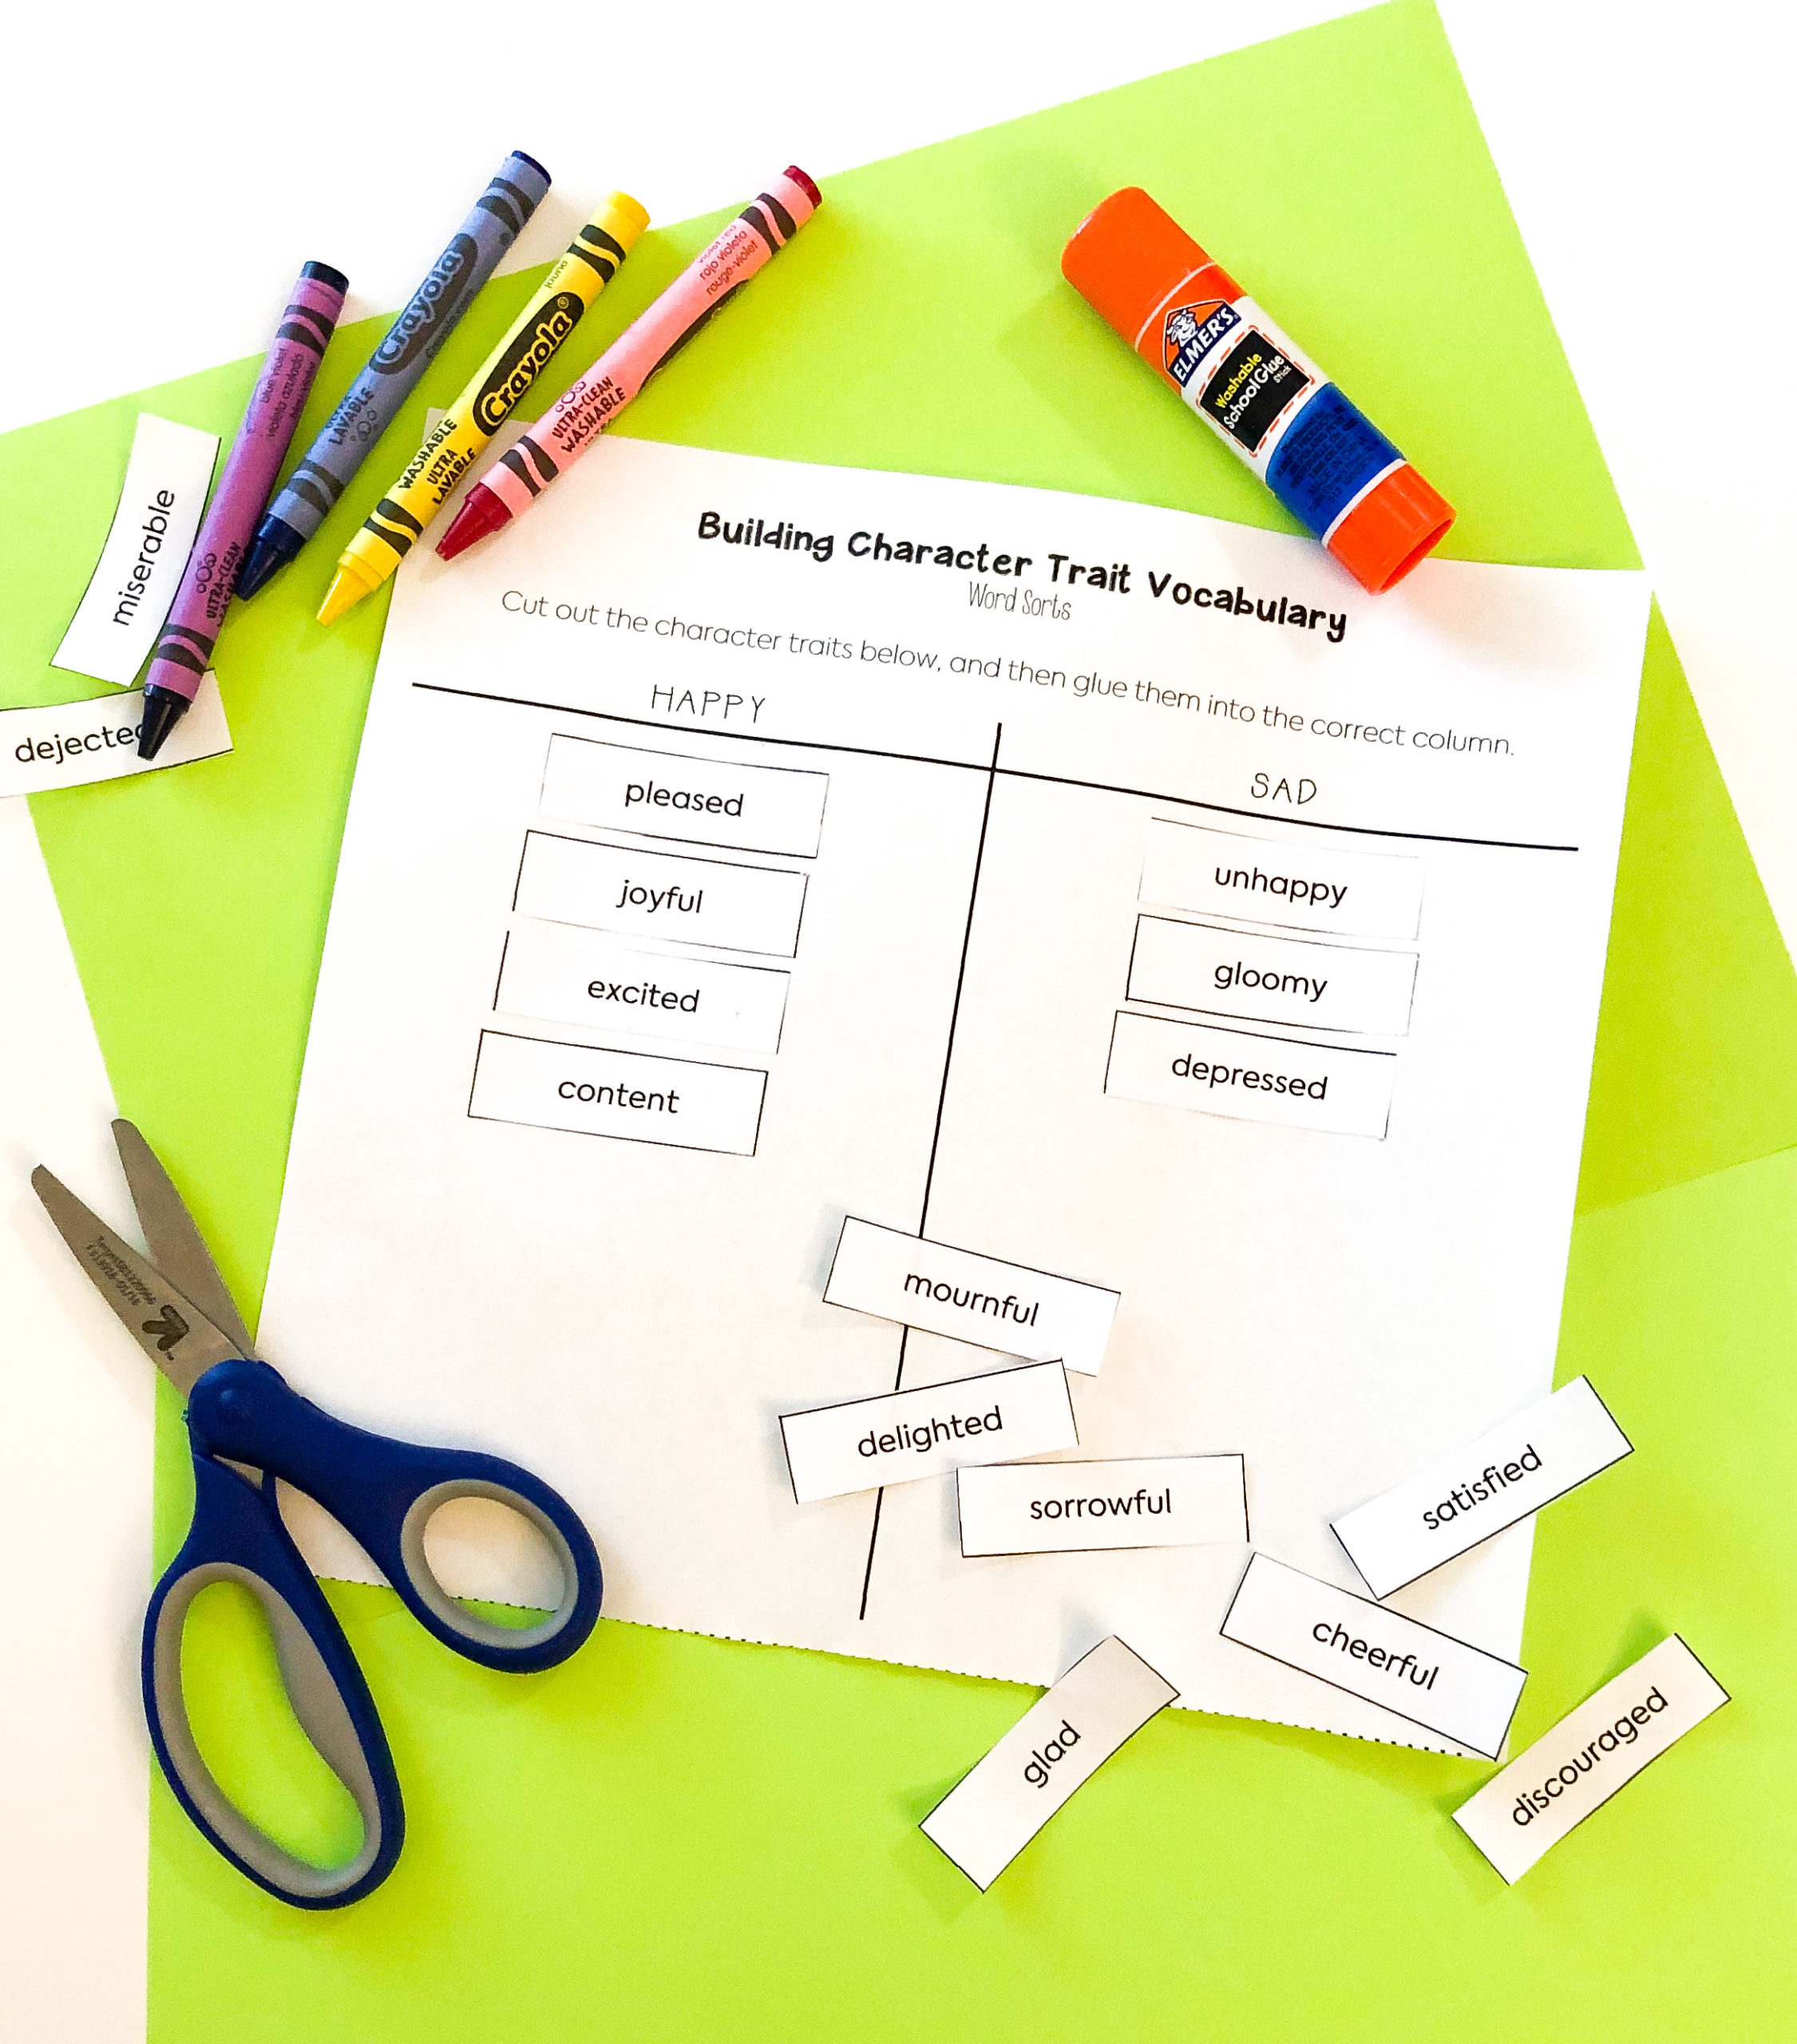 These word sort worksheets are an engaging way to help students practice with different character trait vocabulary